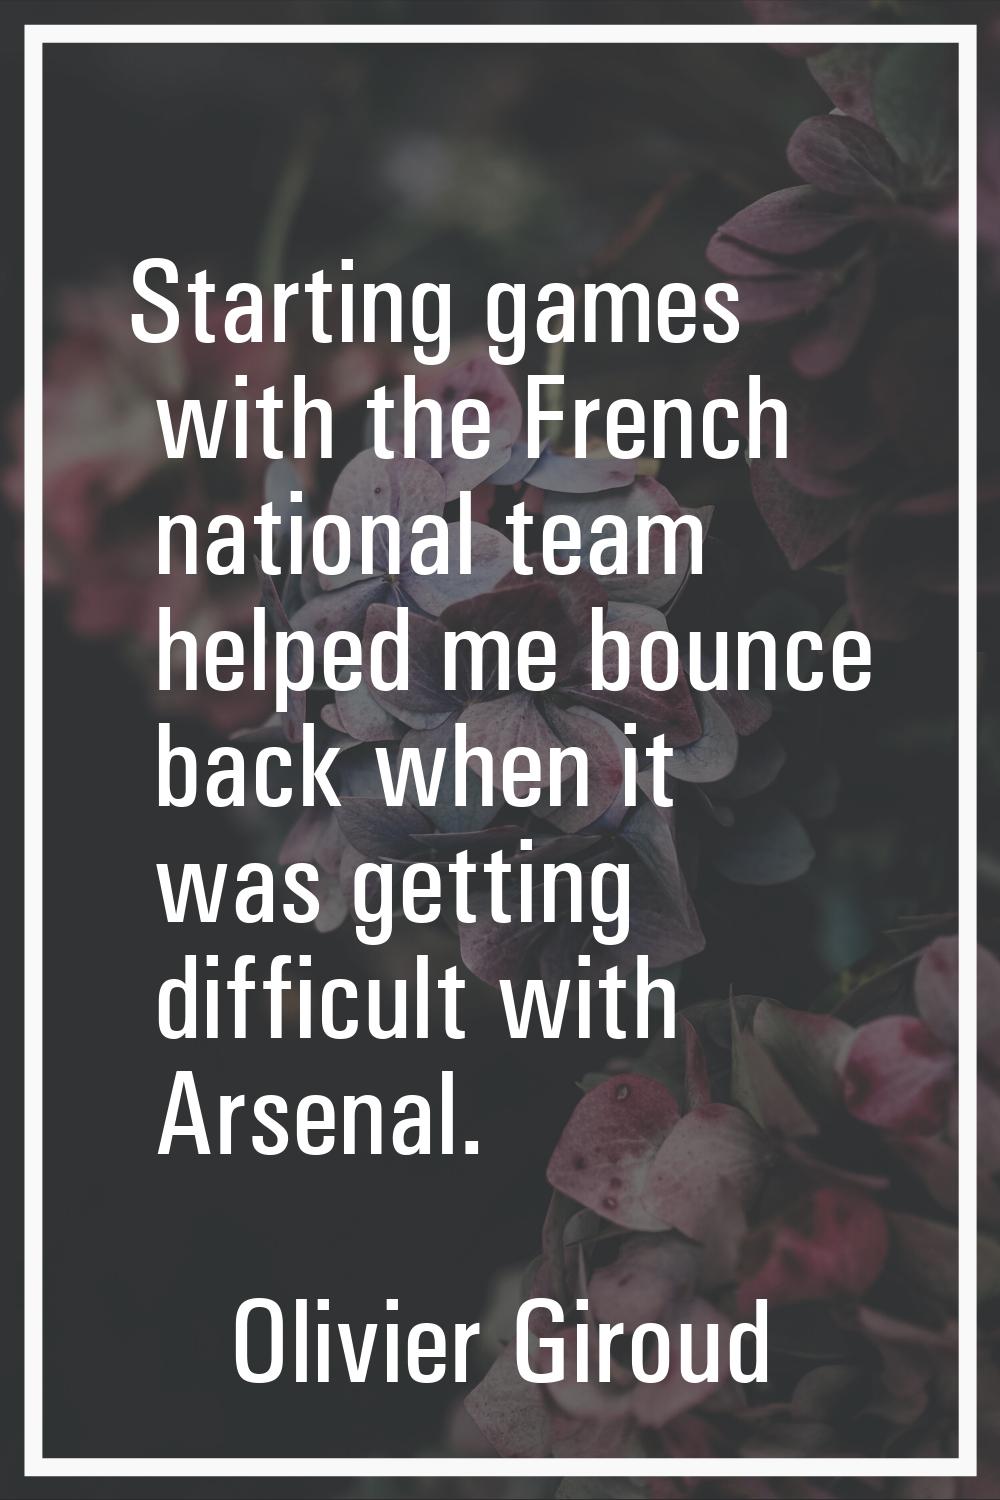 Starting games with the French national team helped me bounce back when it was getting difficult wi